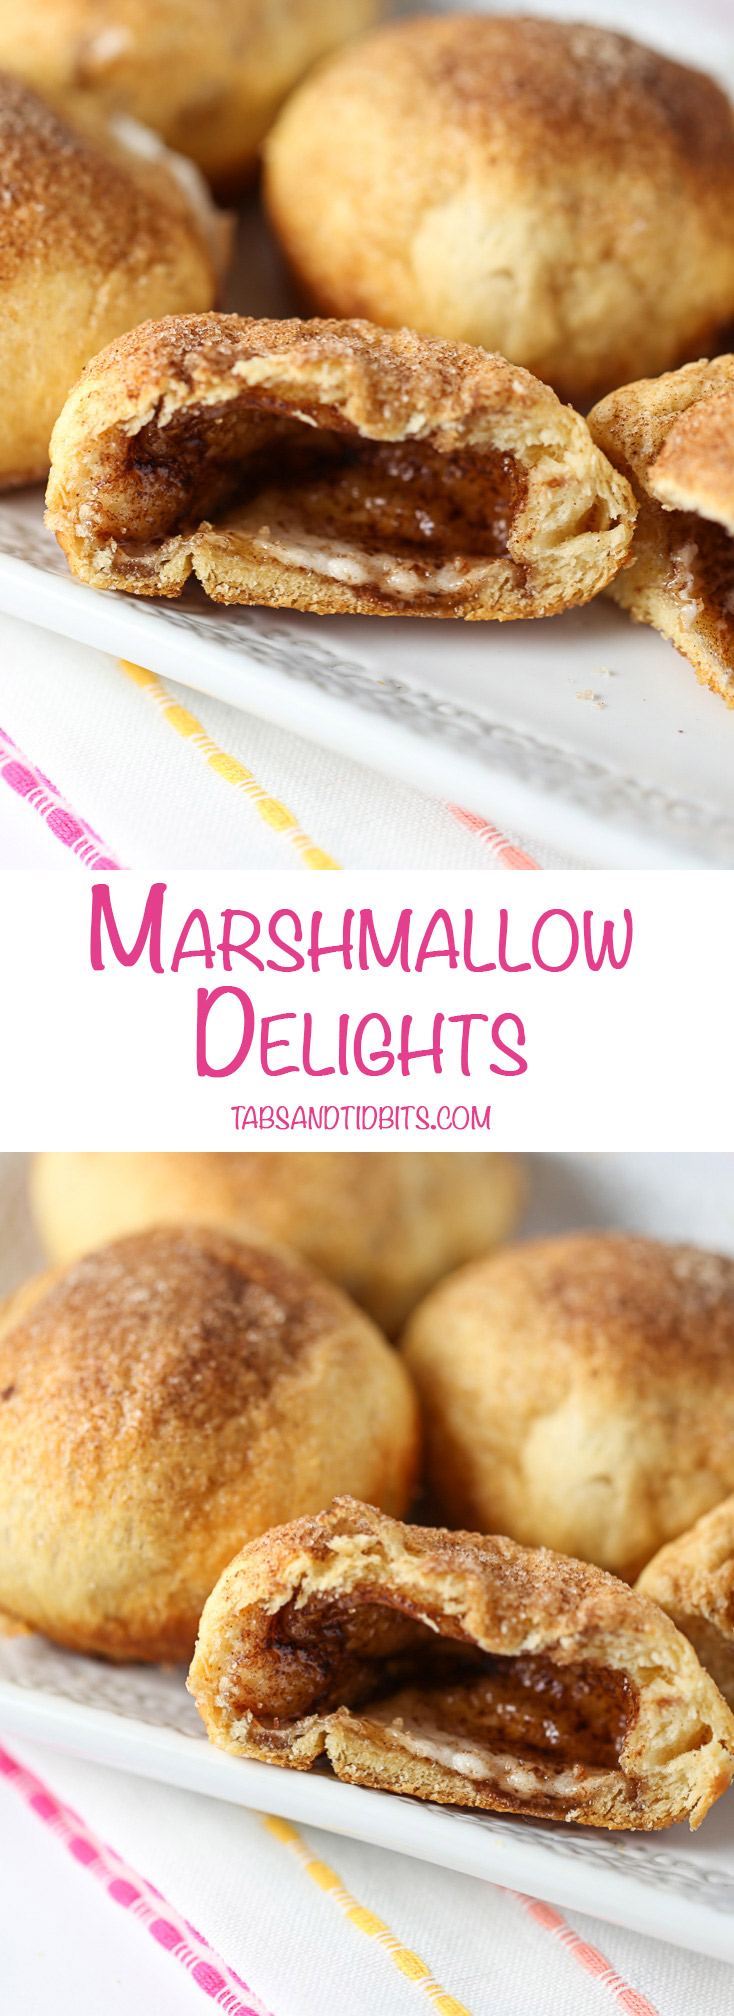 Marshmallow Delights - These taste like an inside out cinnamon roll!